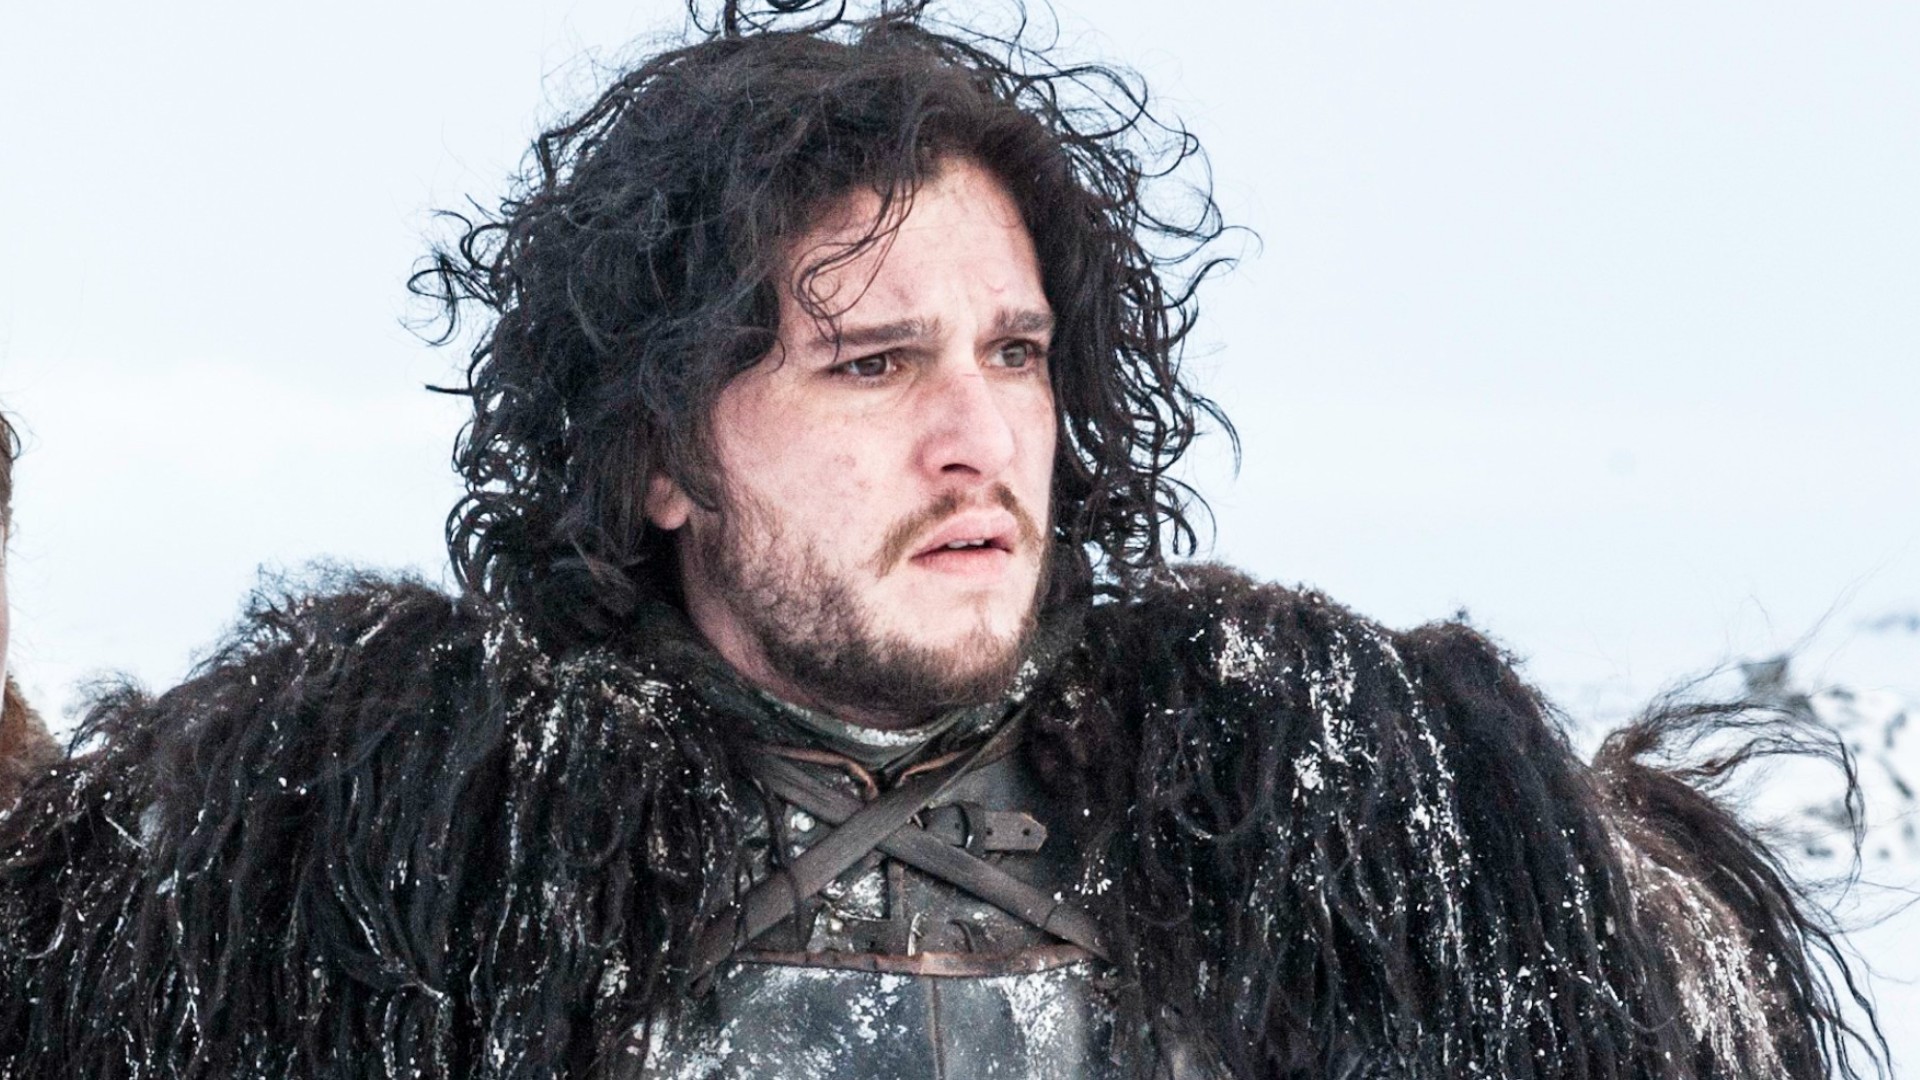 10 Game Of Thrones Characters With The Worst Endings To Their Arcs